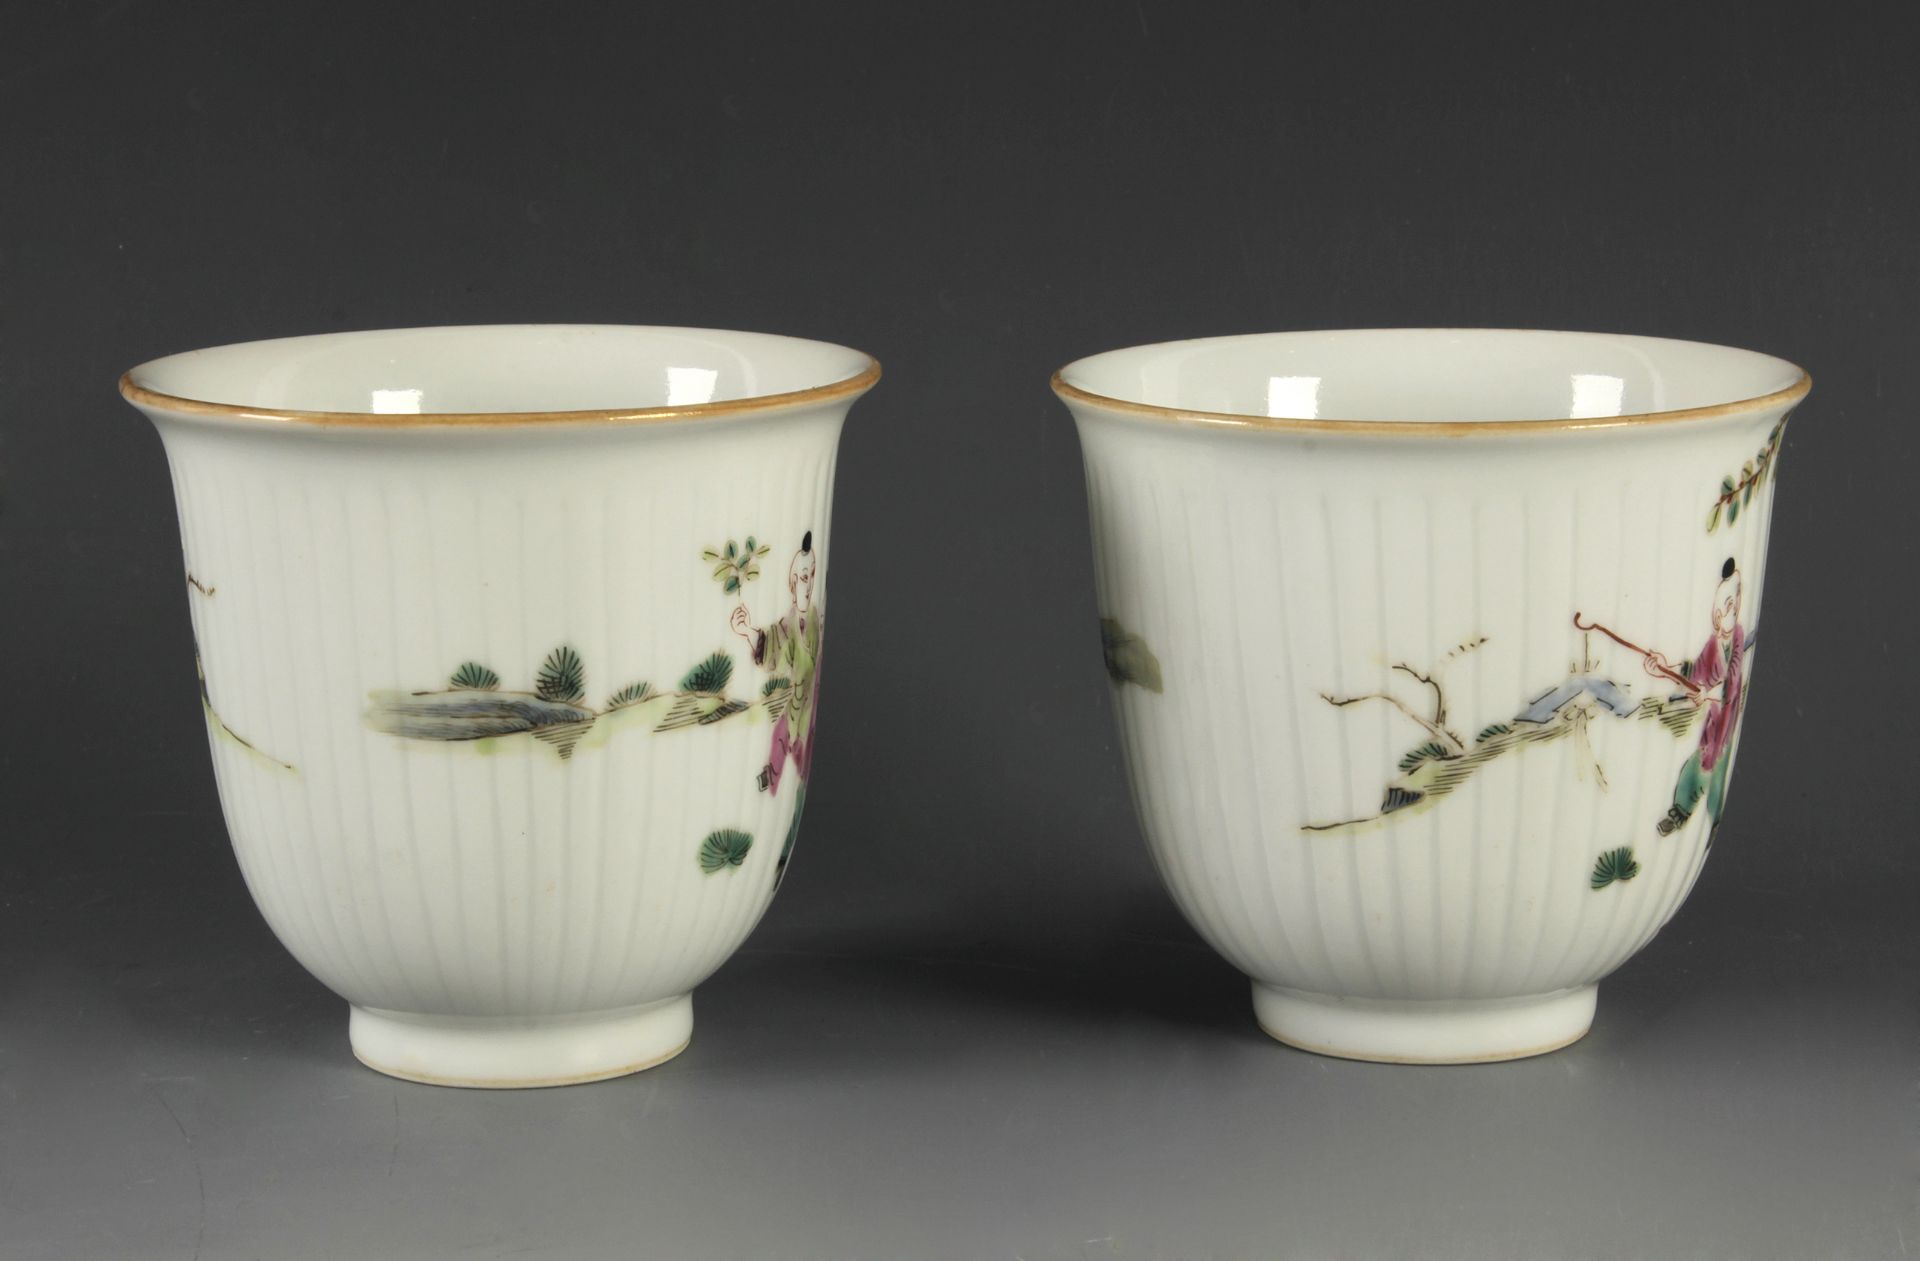 A pair of 19th century Chinese Qing dynasty porcelain cups - Image 2 of 2